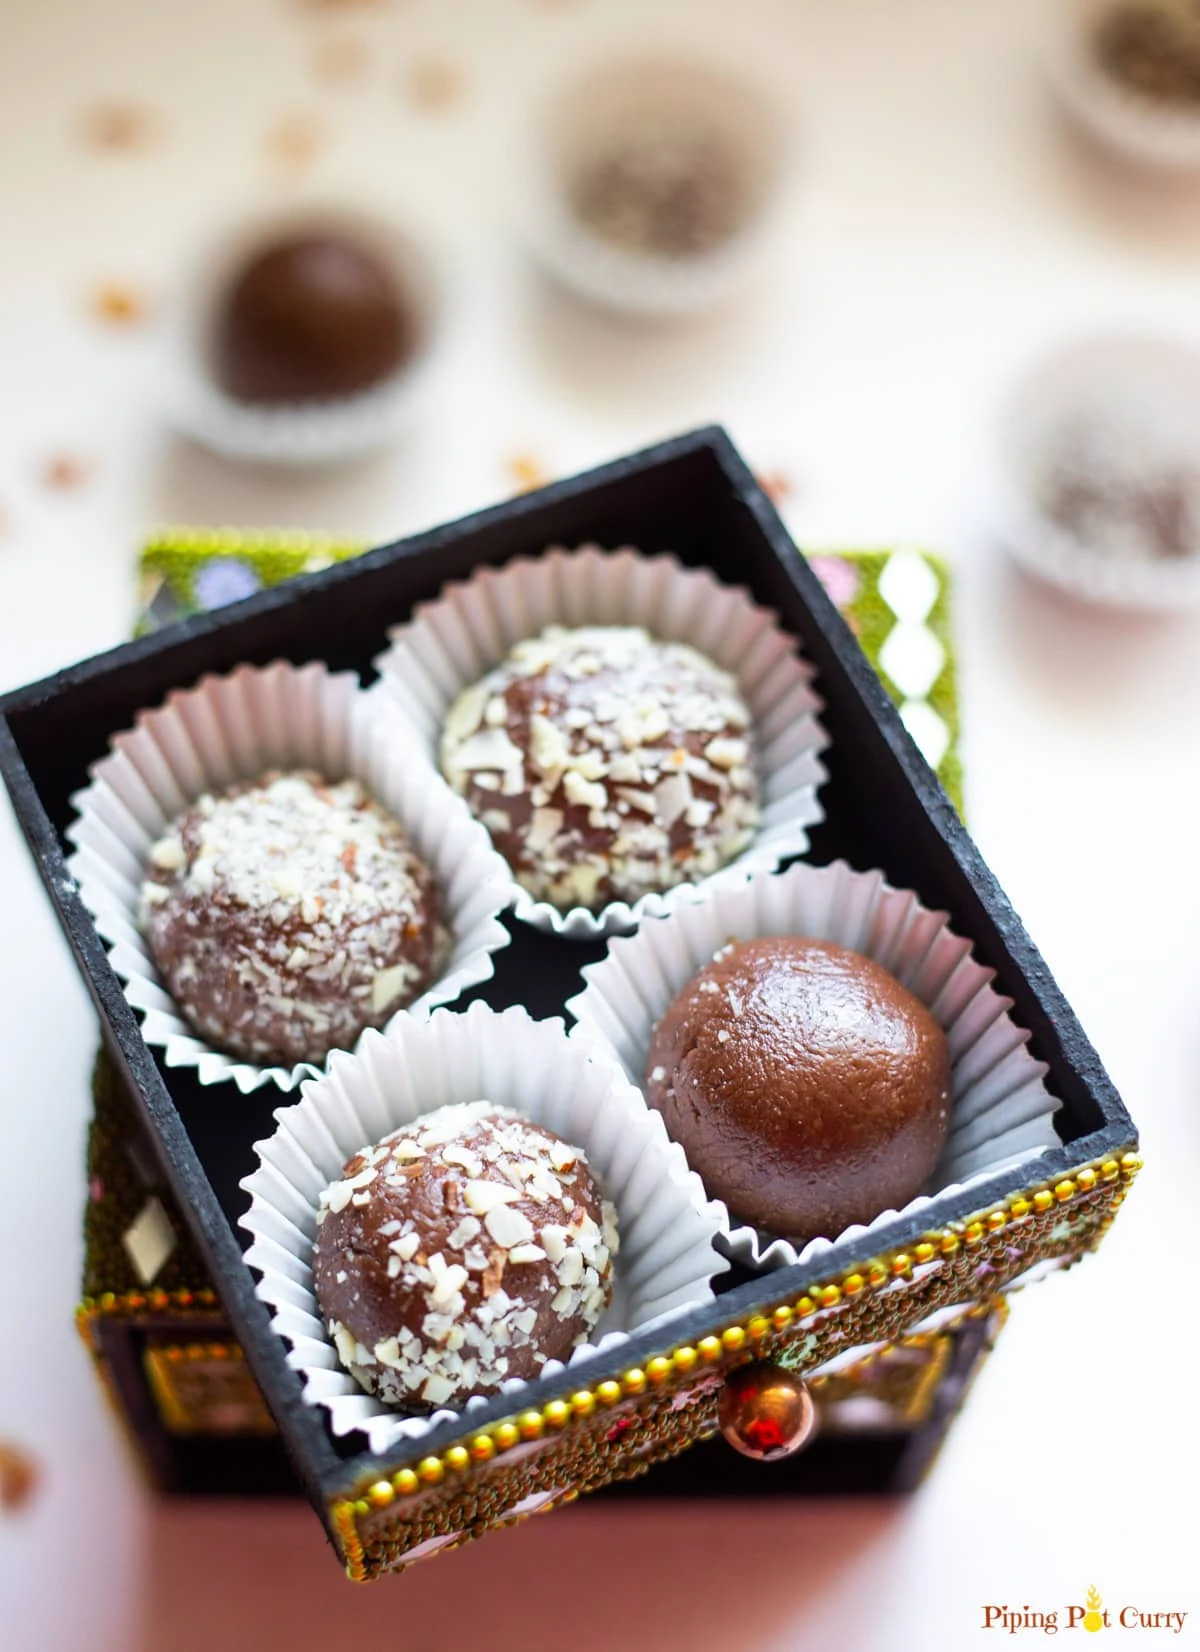 Four Chocolate Ladoo balls In a small decorated box